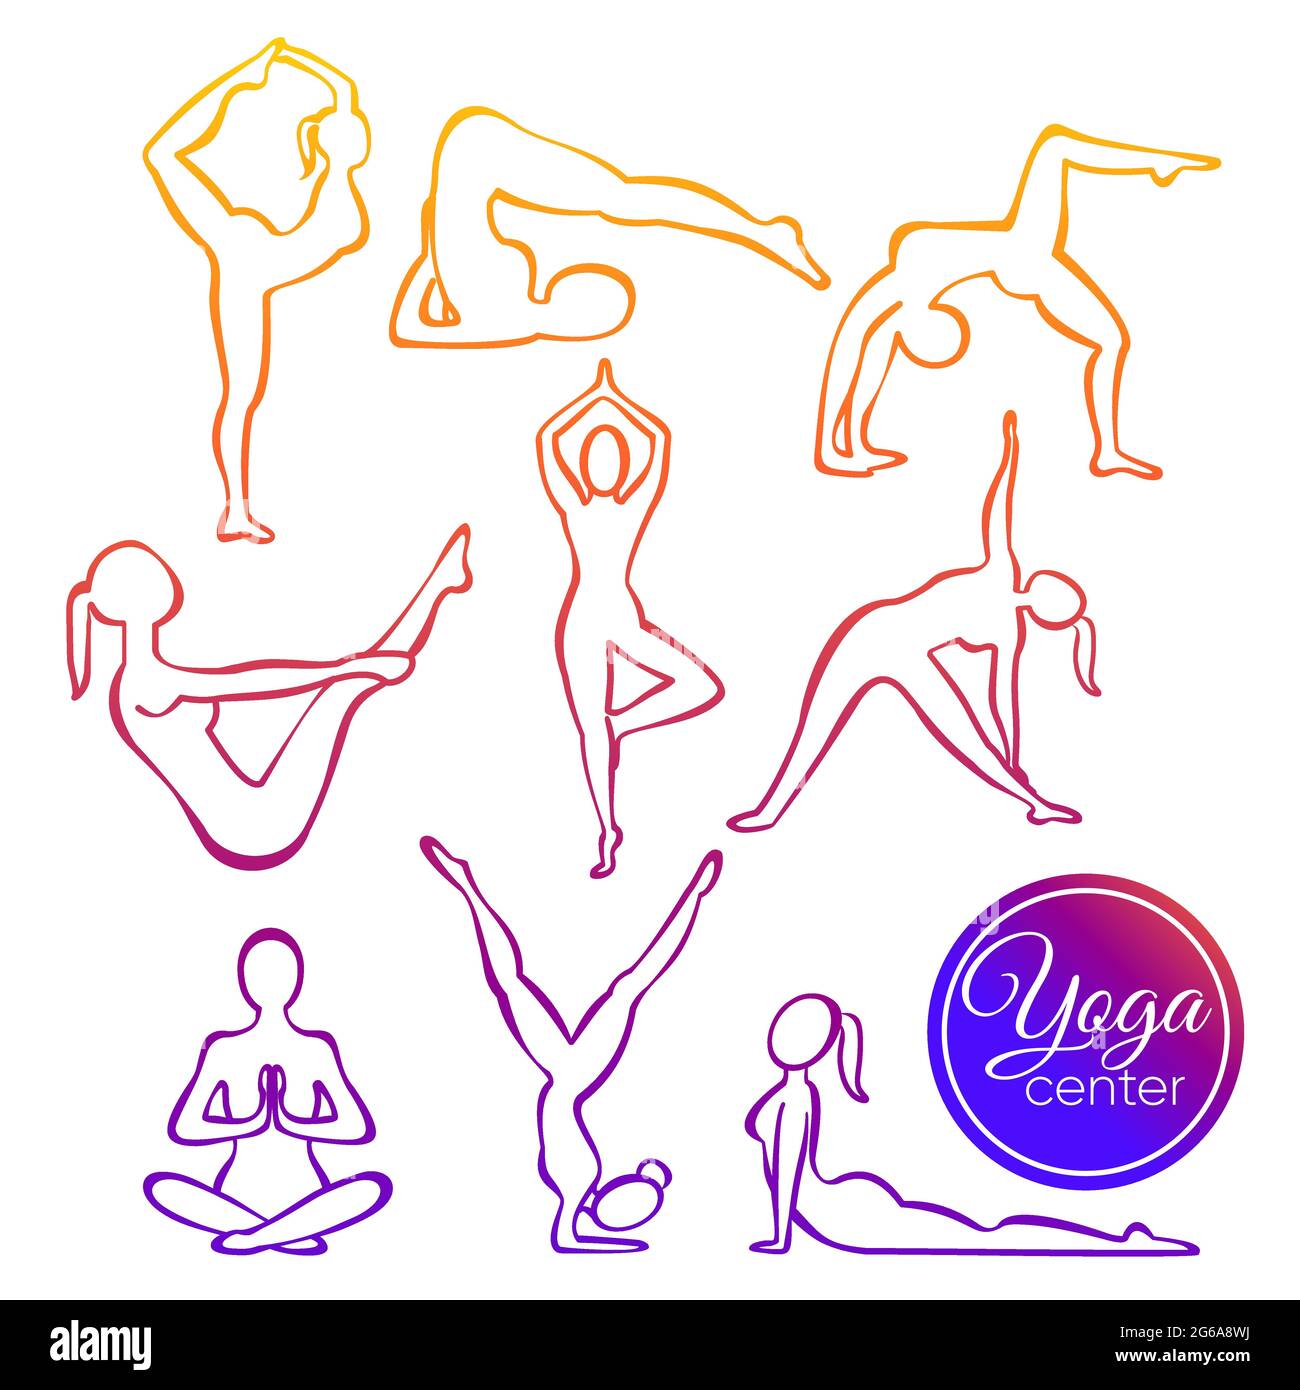 Vector illustration set of yoga poses in line silhouette style. Colorful Fitness Concept, healthy lifestyle. Stock Vector